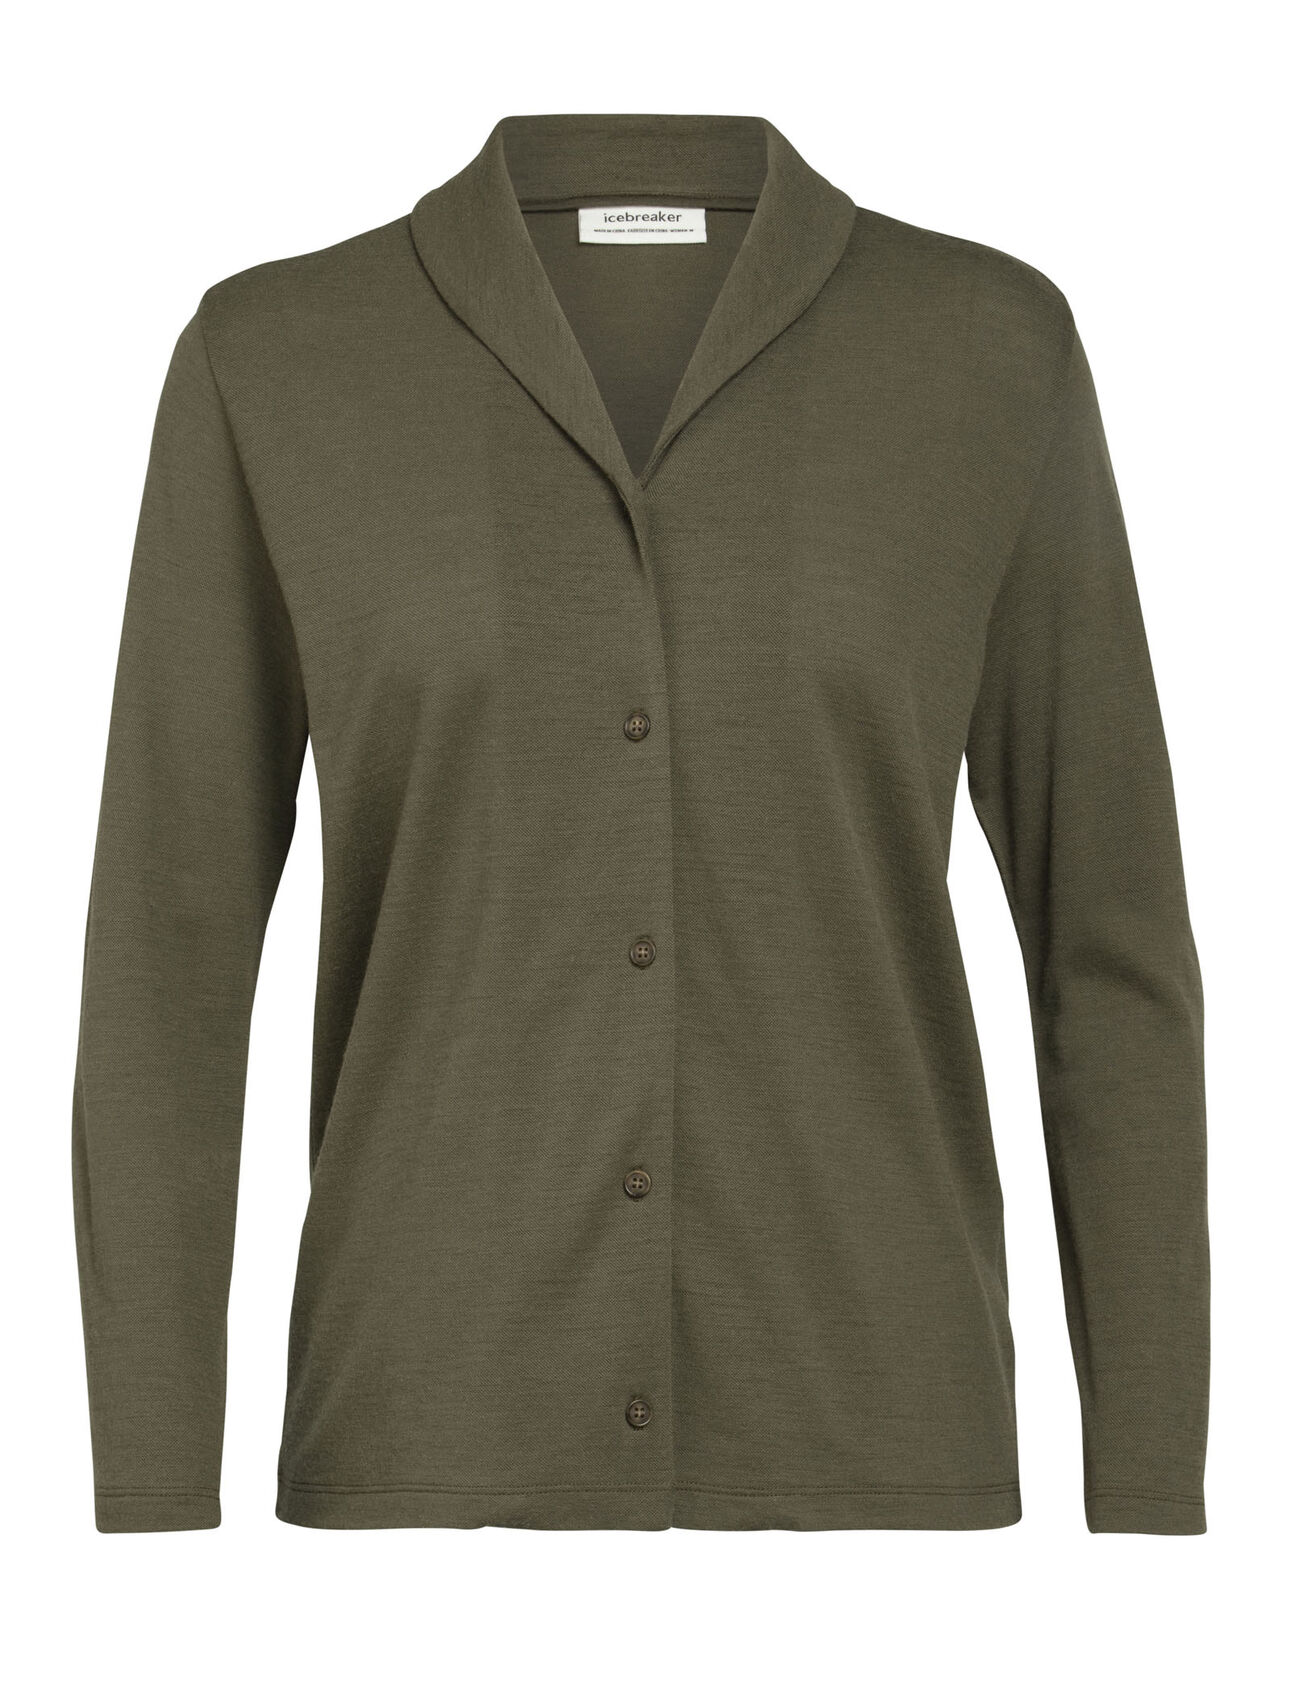 Womens Merino Pique Long Sleeve Shirt A cardigan-style shirt with a shawl collar and lightweight 100% merino wool knit, Merino Pique Long Sleeve Shirt is full of everyday comfort.